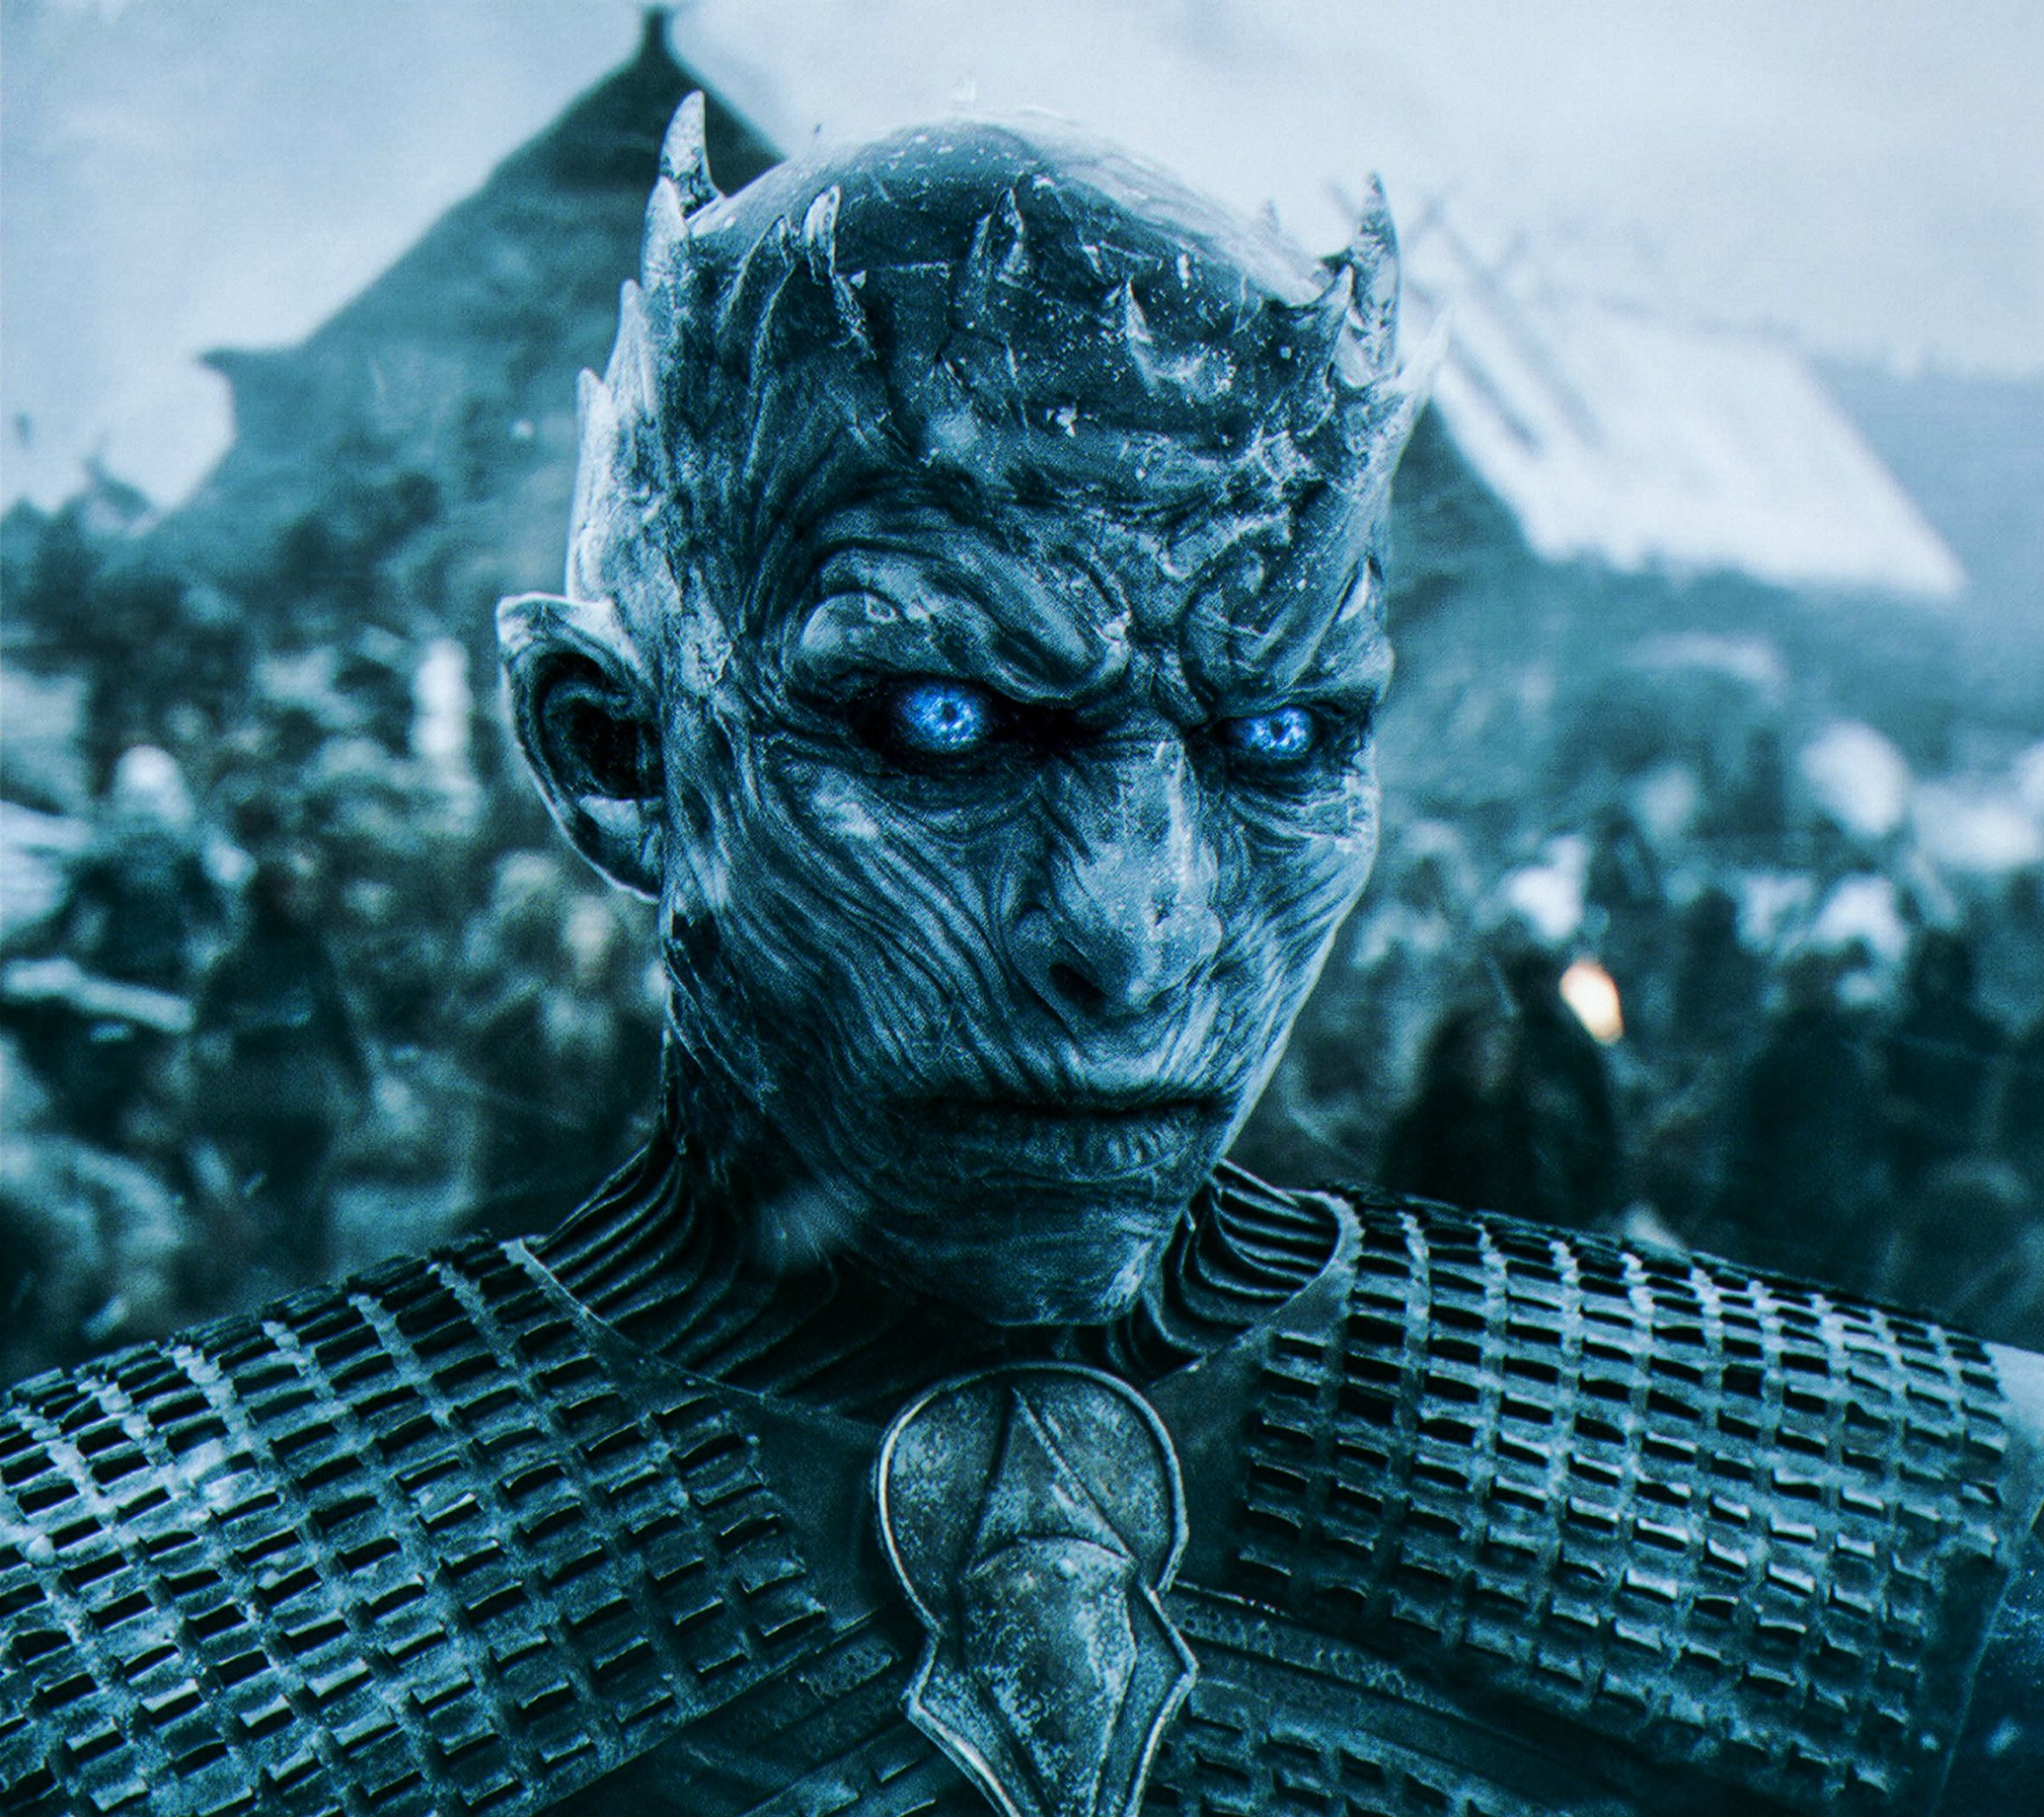 game of thrones, tv show, white walker, night king (game of thrones)